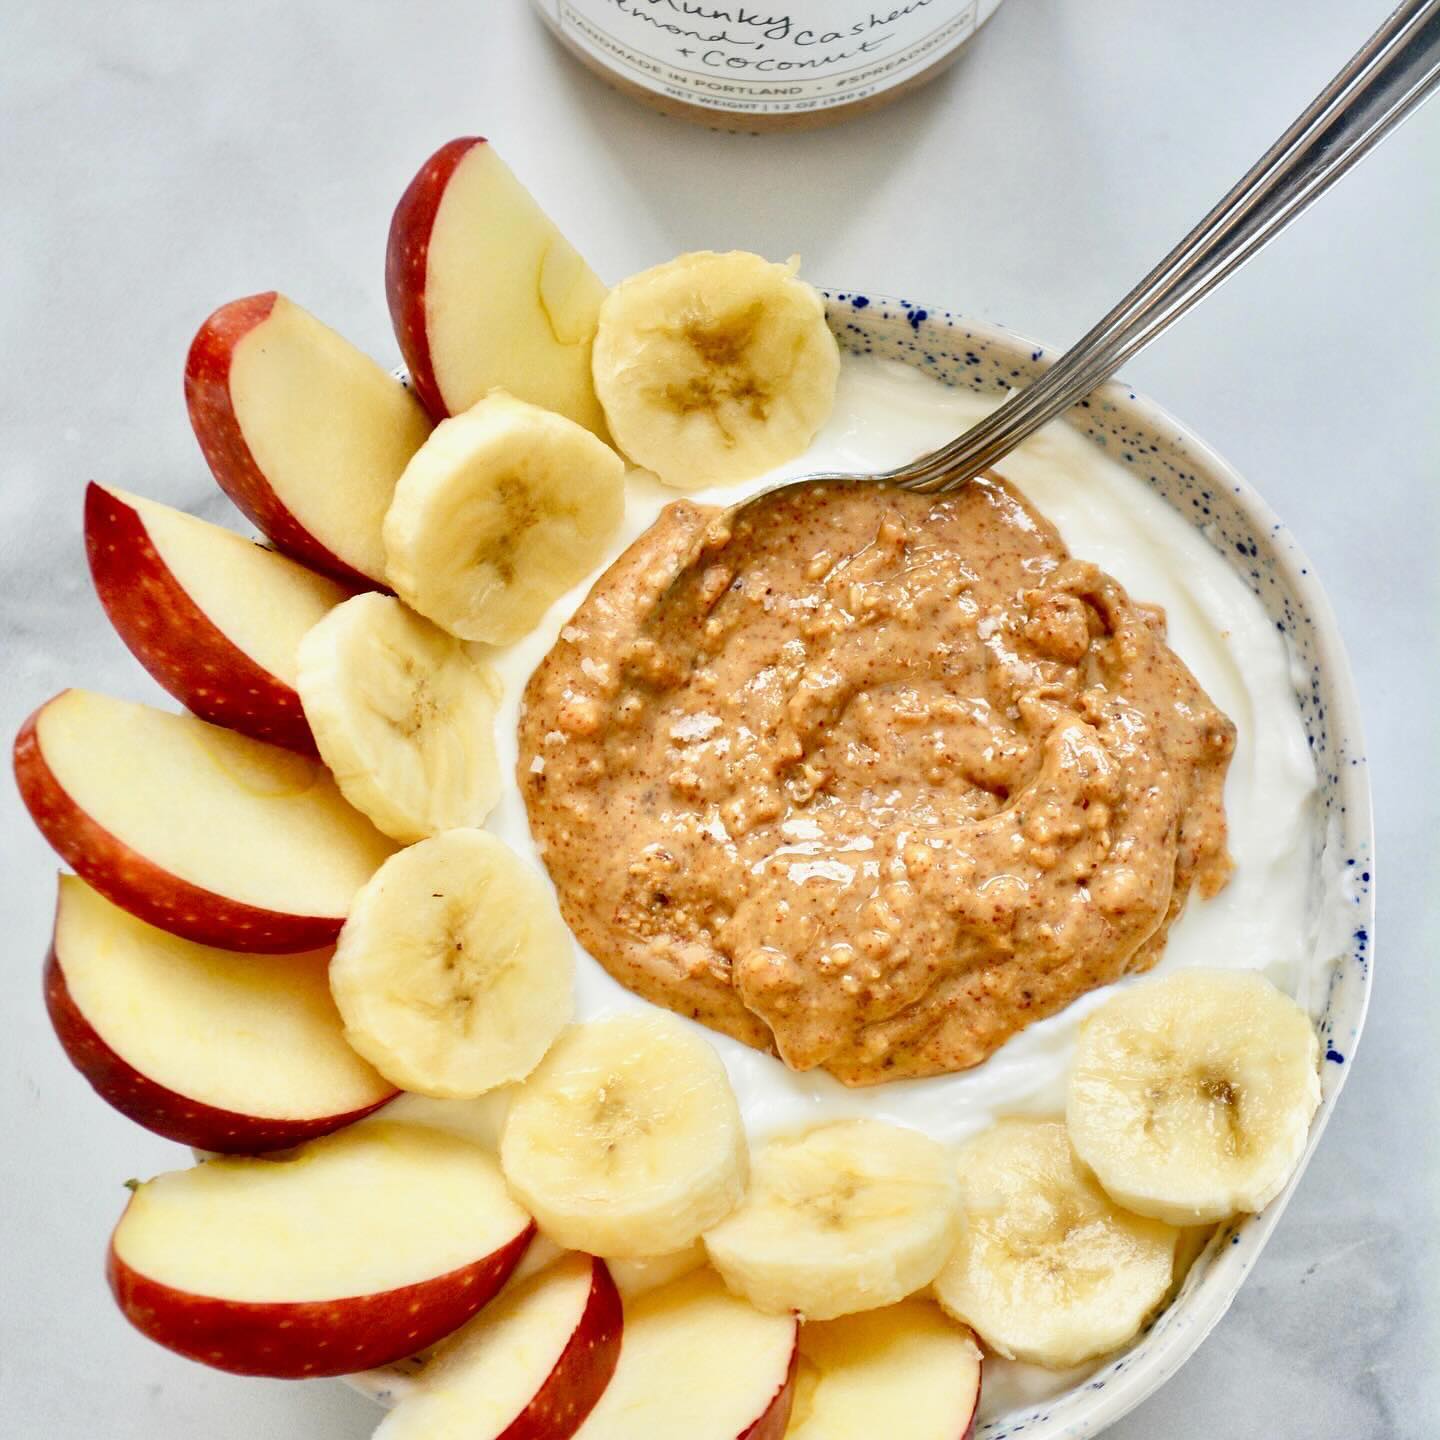 Ground Up Nut Butters